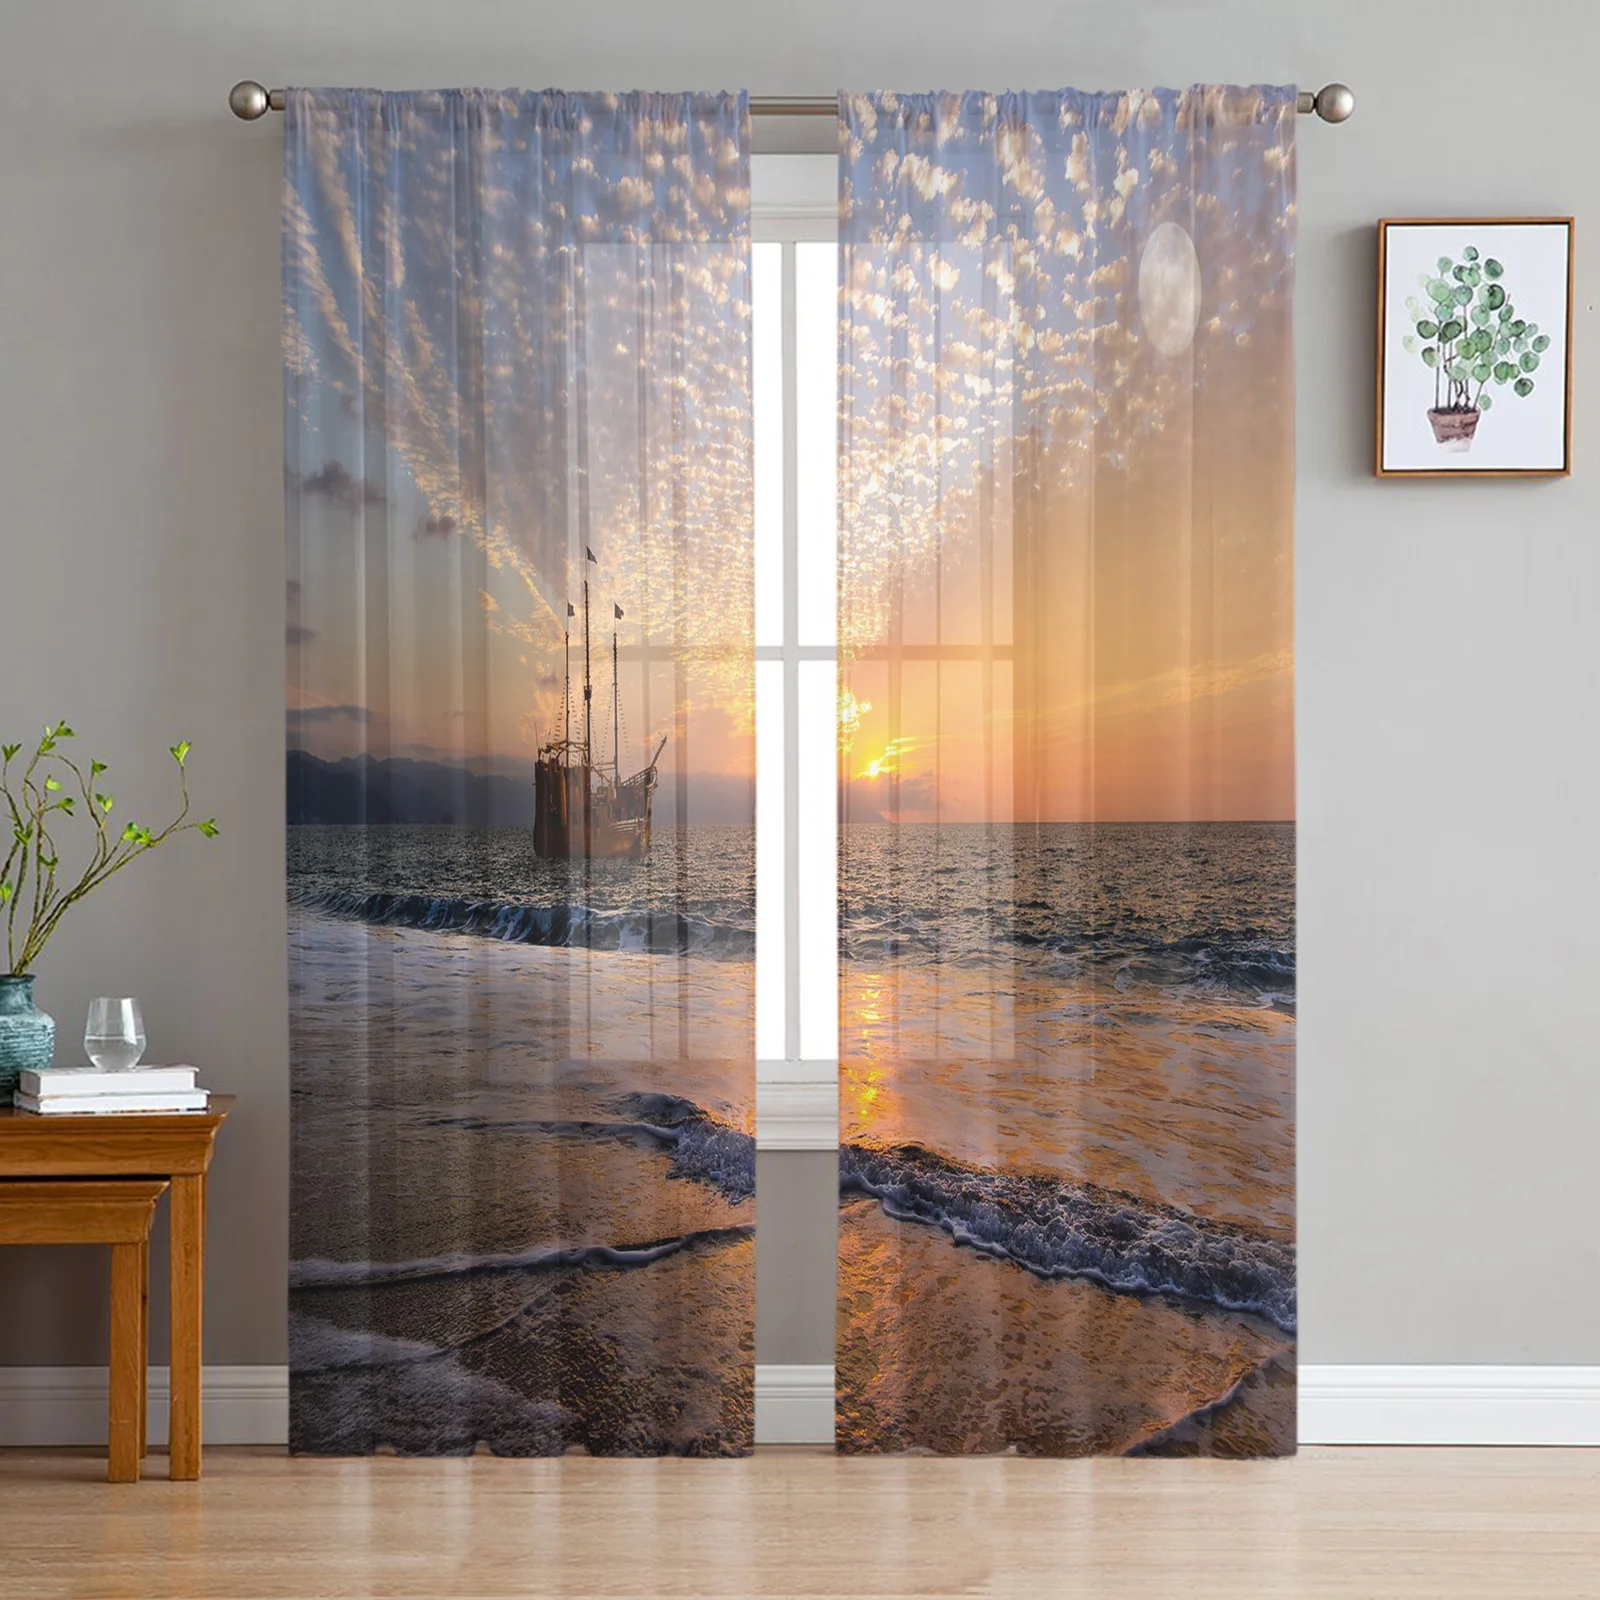 Pirate Ship Seaside Beach Dusk Tulle Curtains For Living Room Bedroom Kitchen Decoration Chiffon Sheer Voile Window Curtains